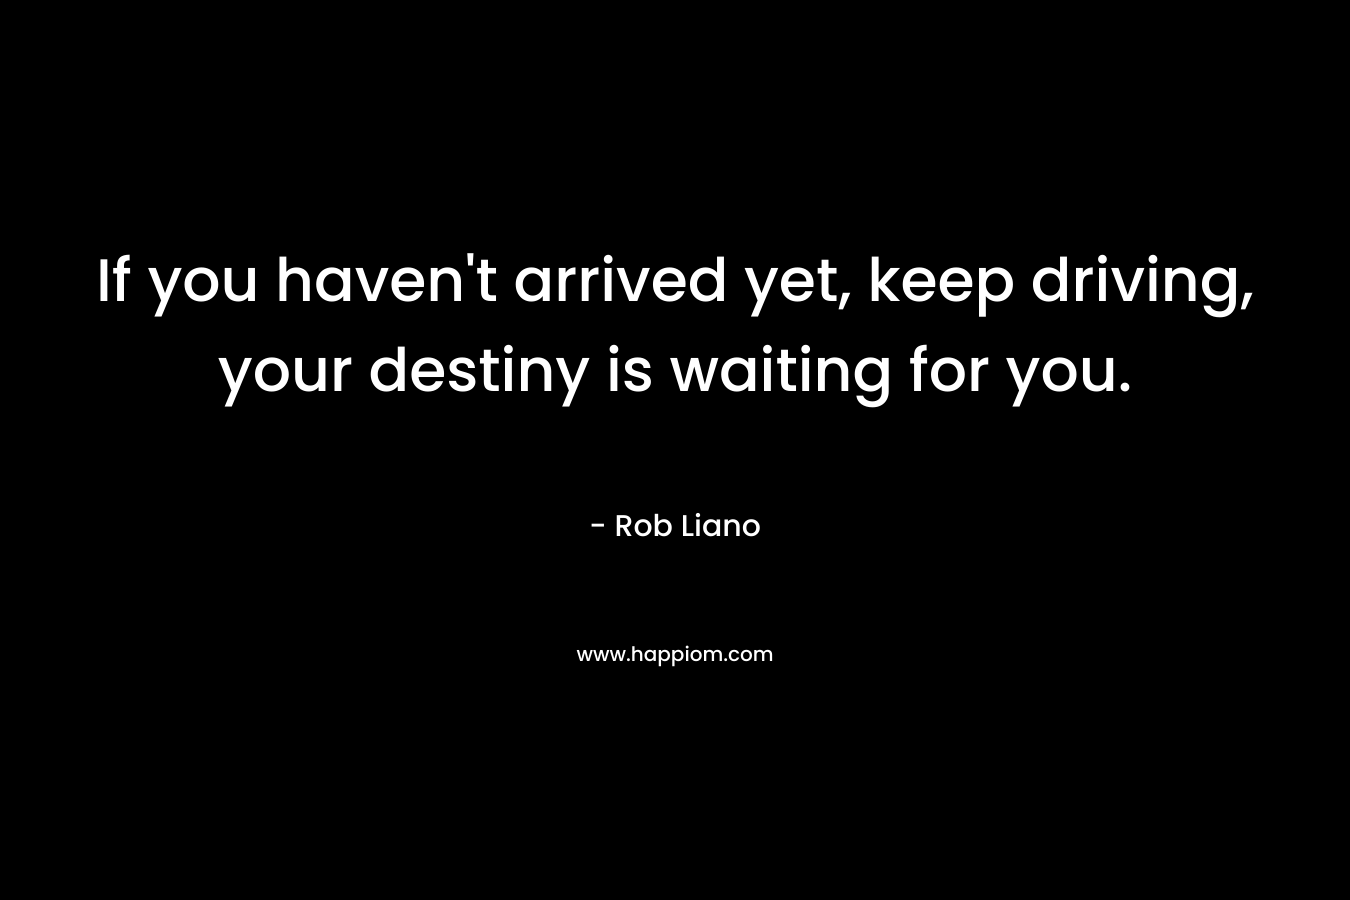 If you haven't arrived yet, keep driving, your destiny is waiting for you.